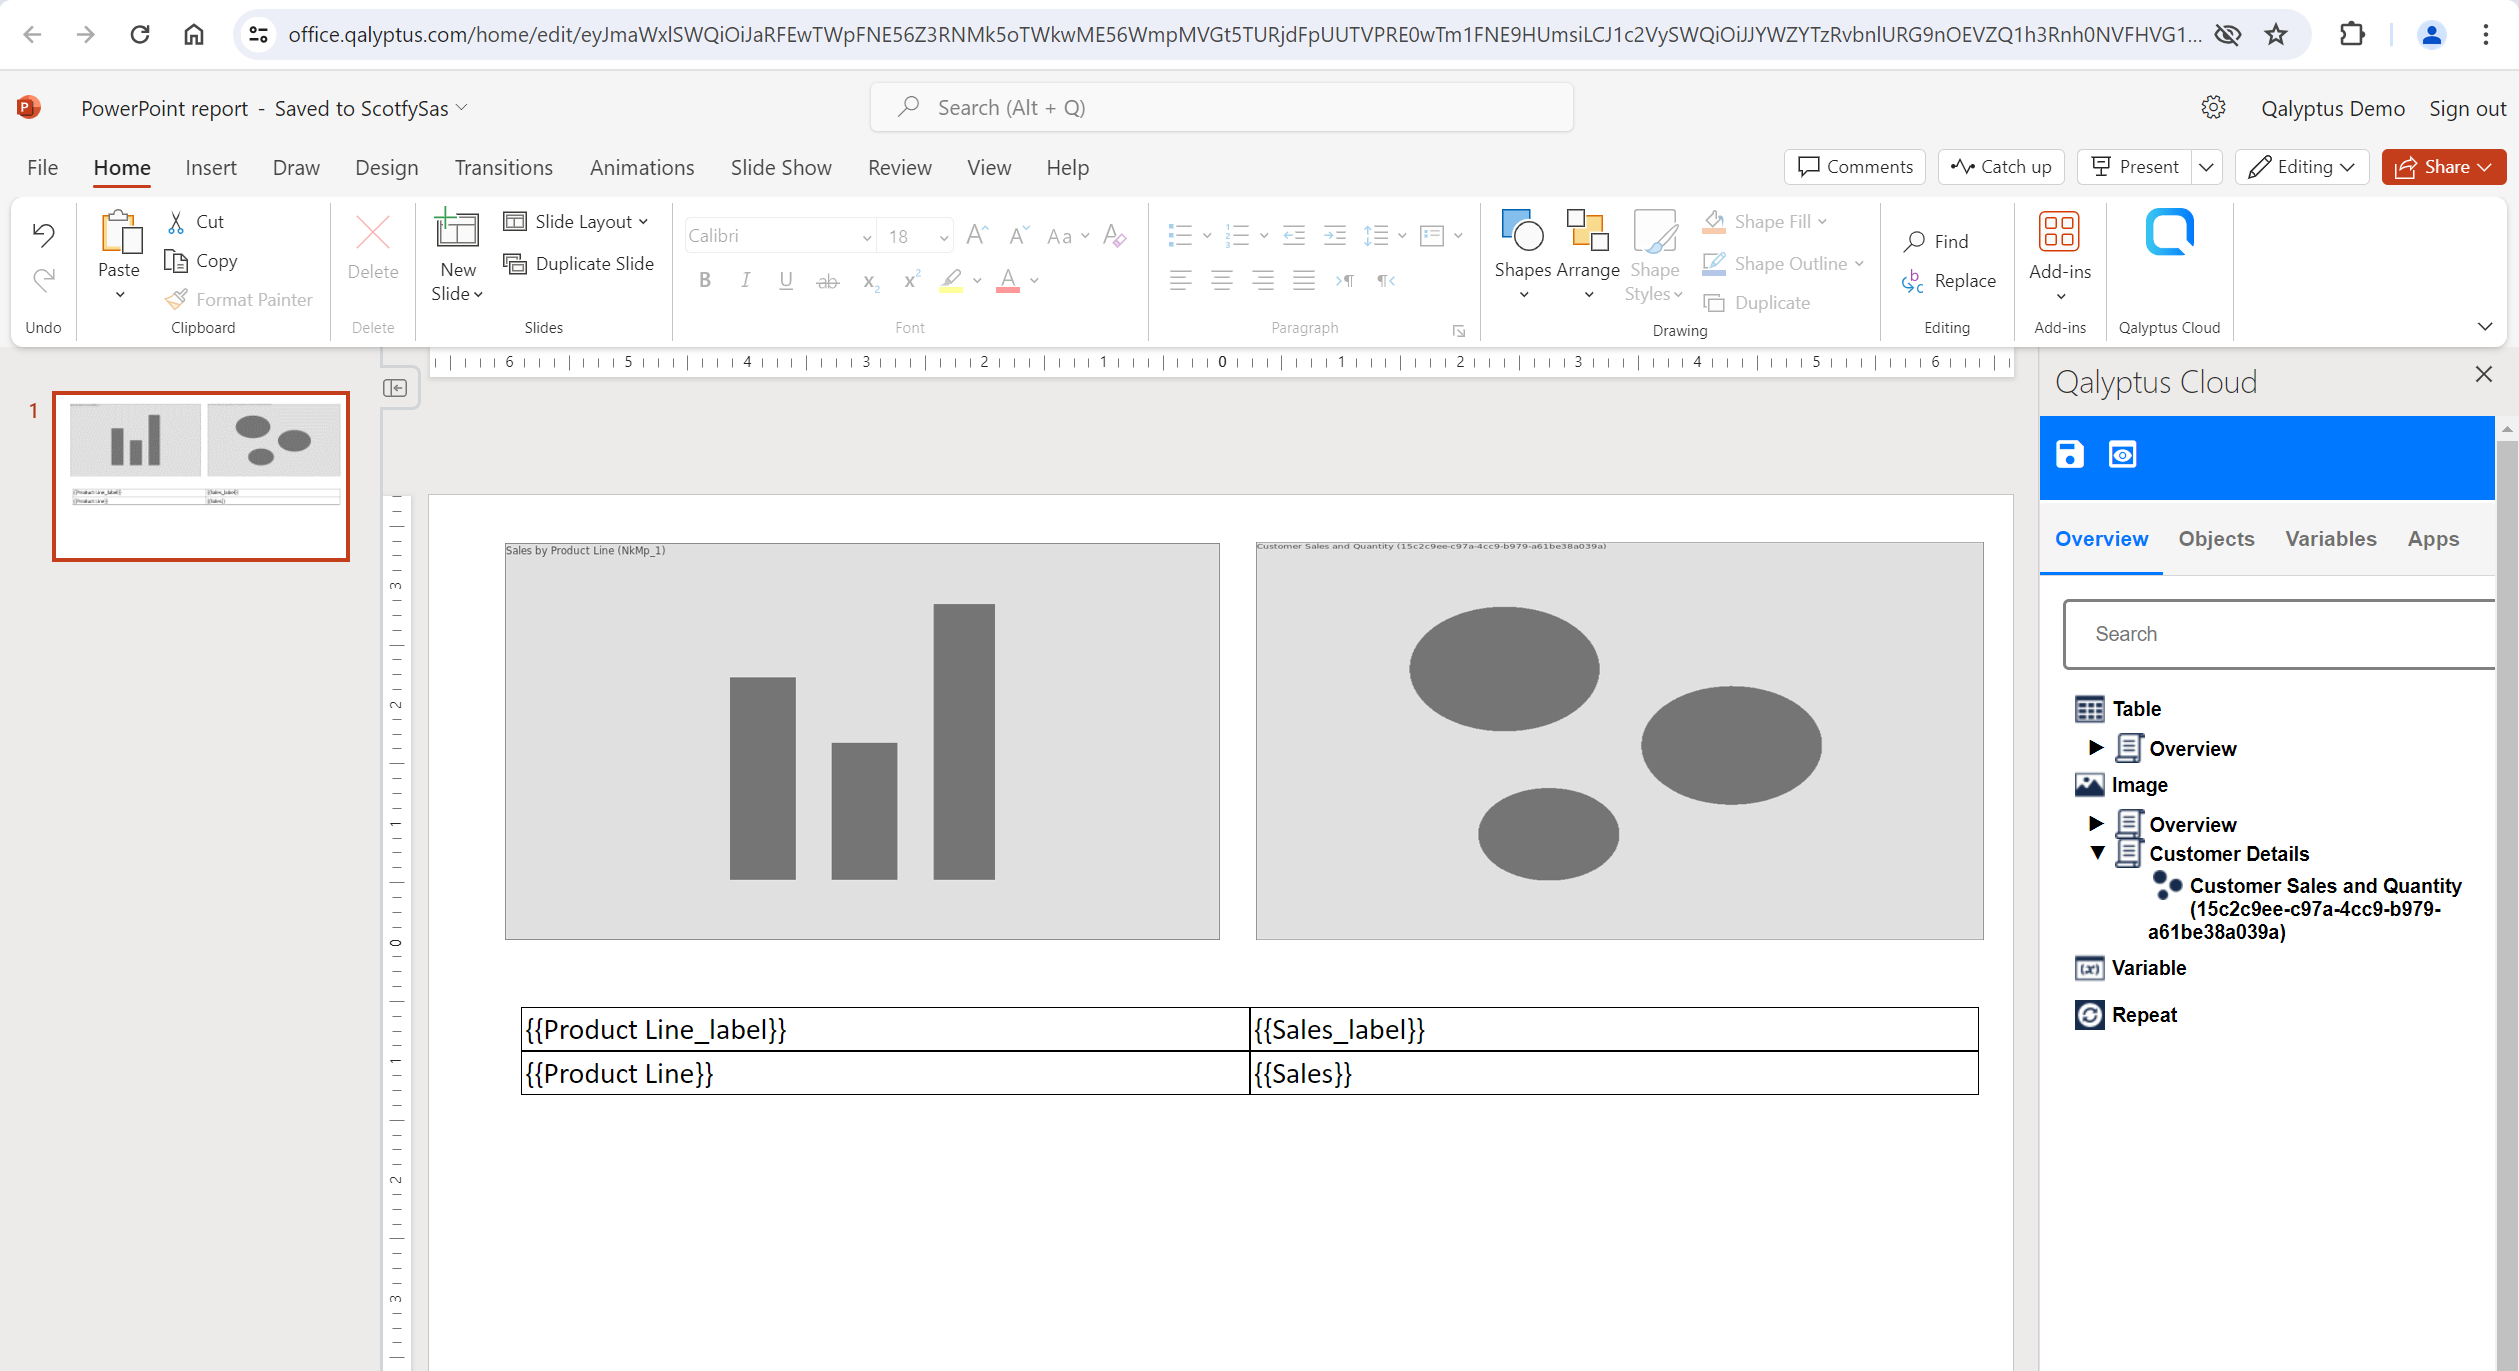 Qalyptus Cloud - Use Microsoft 365 (Office for the web) to design reports